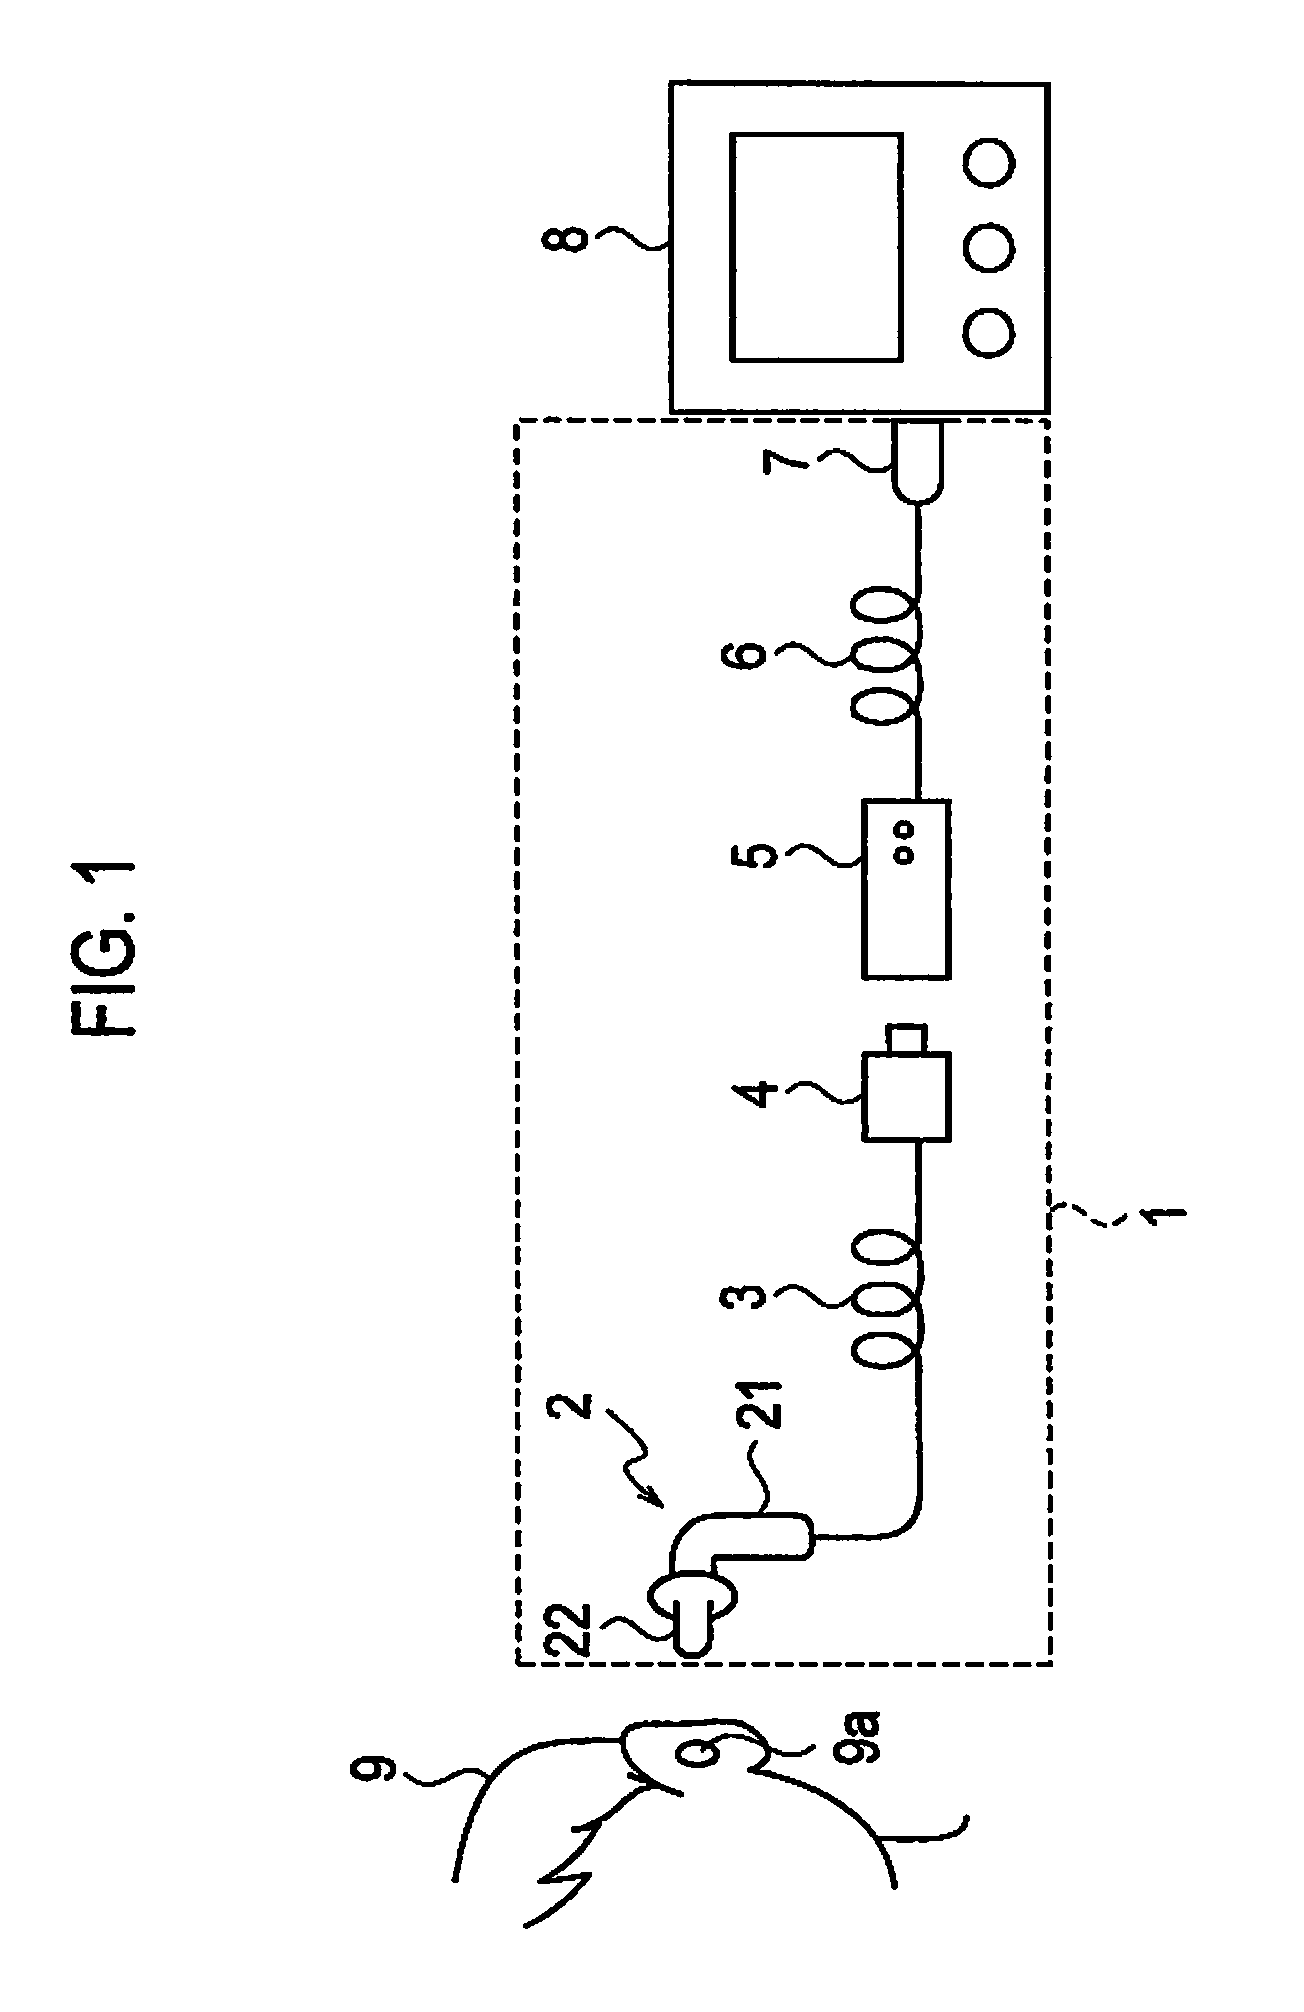 Ear thermometer and measuring apparatus used with it